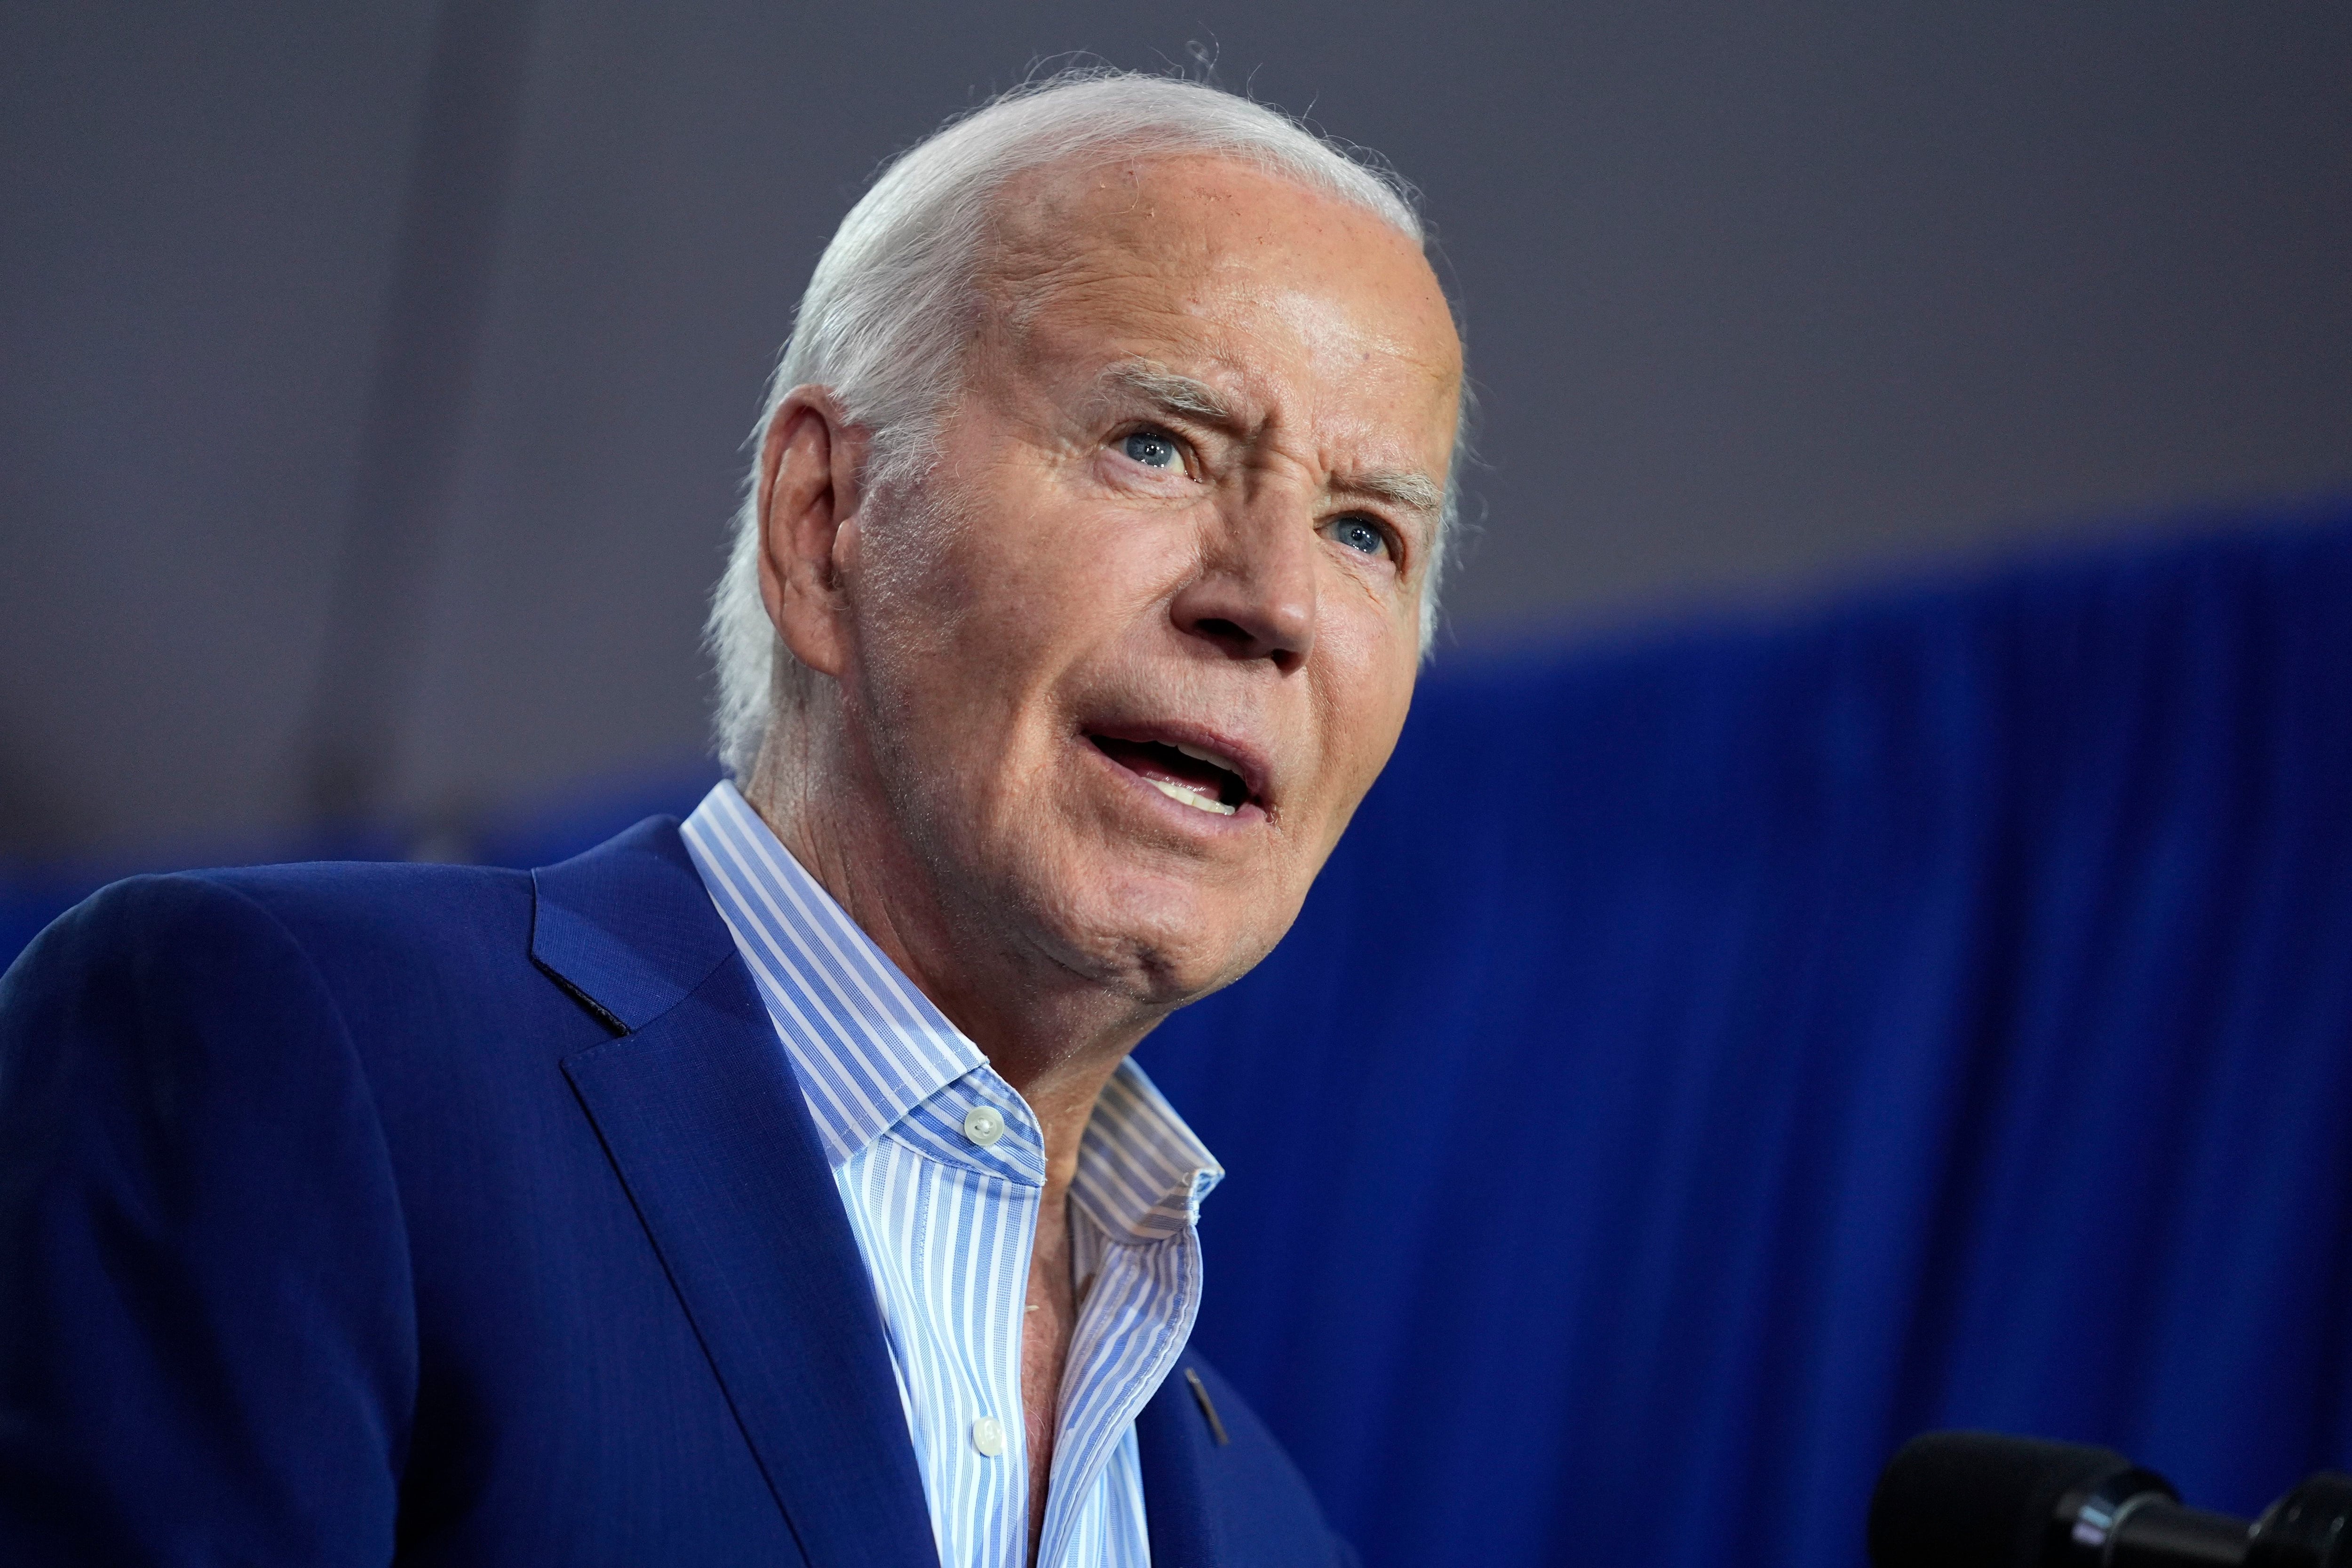 Biden is making appeals to donors as concerns persist over his presidential debate performance thumbnail